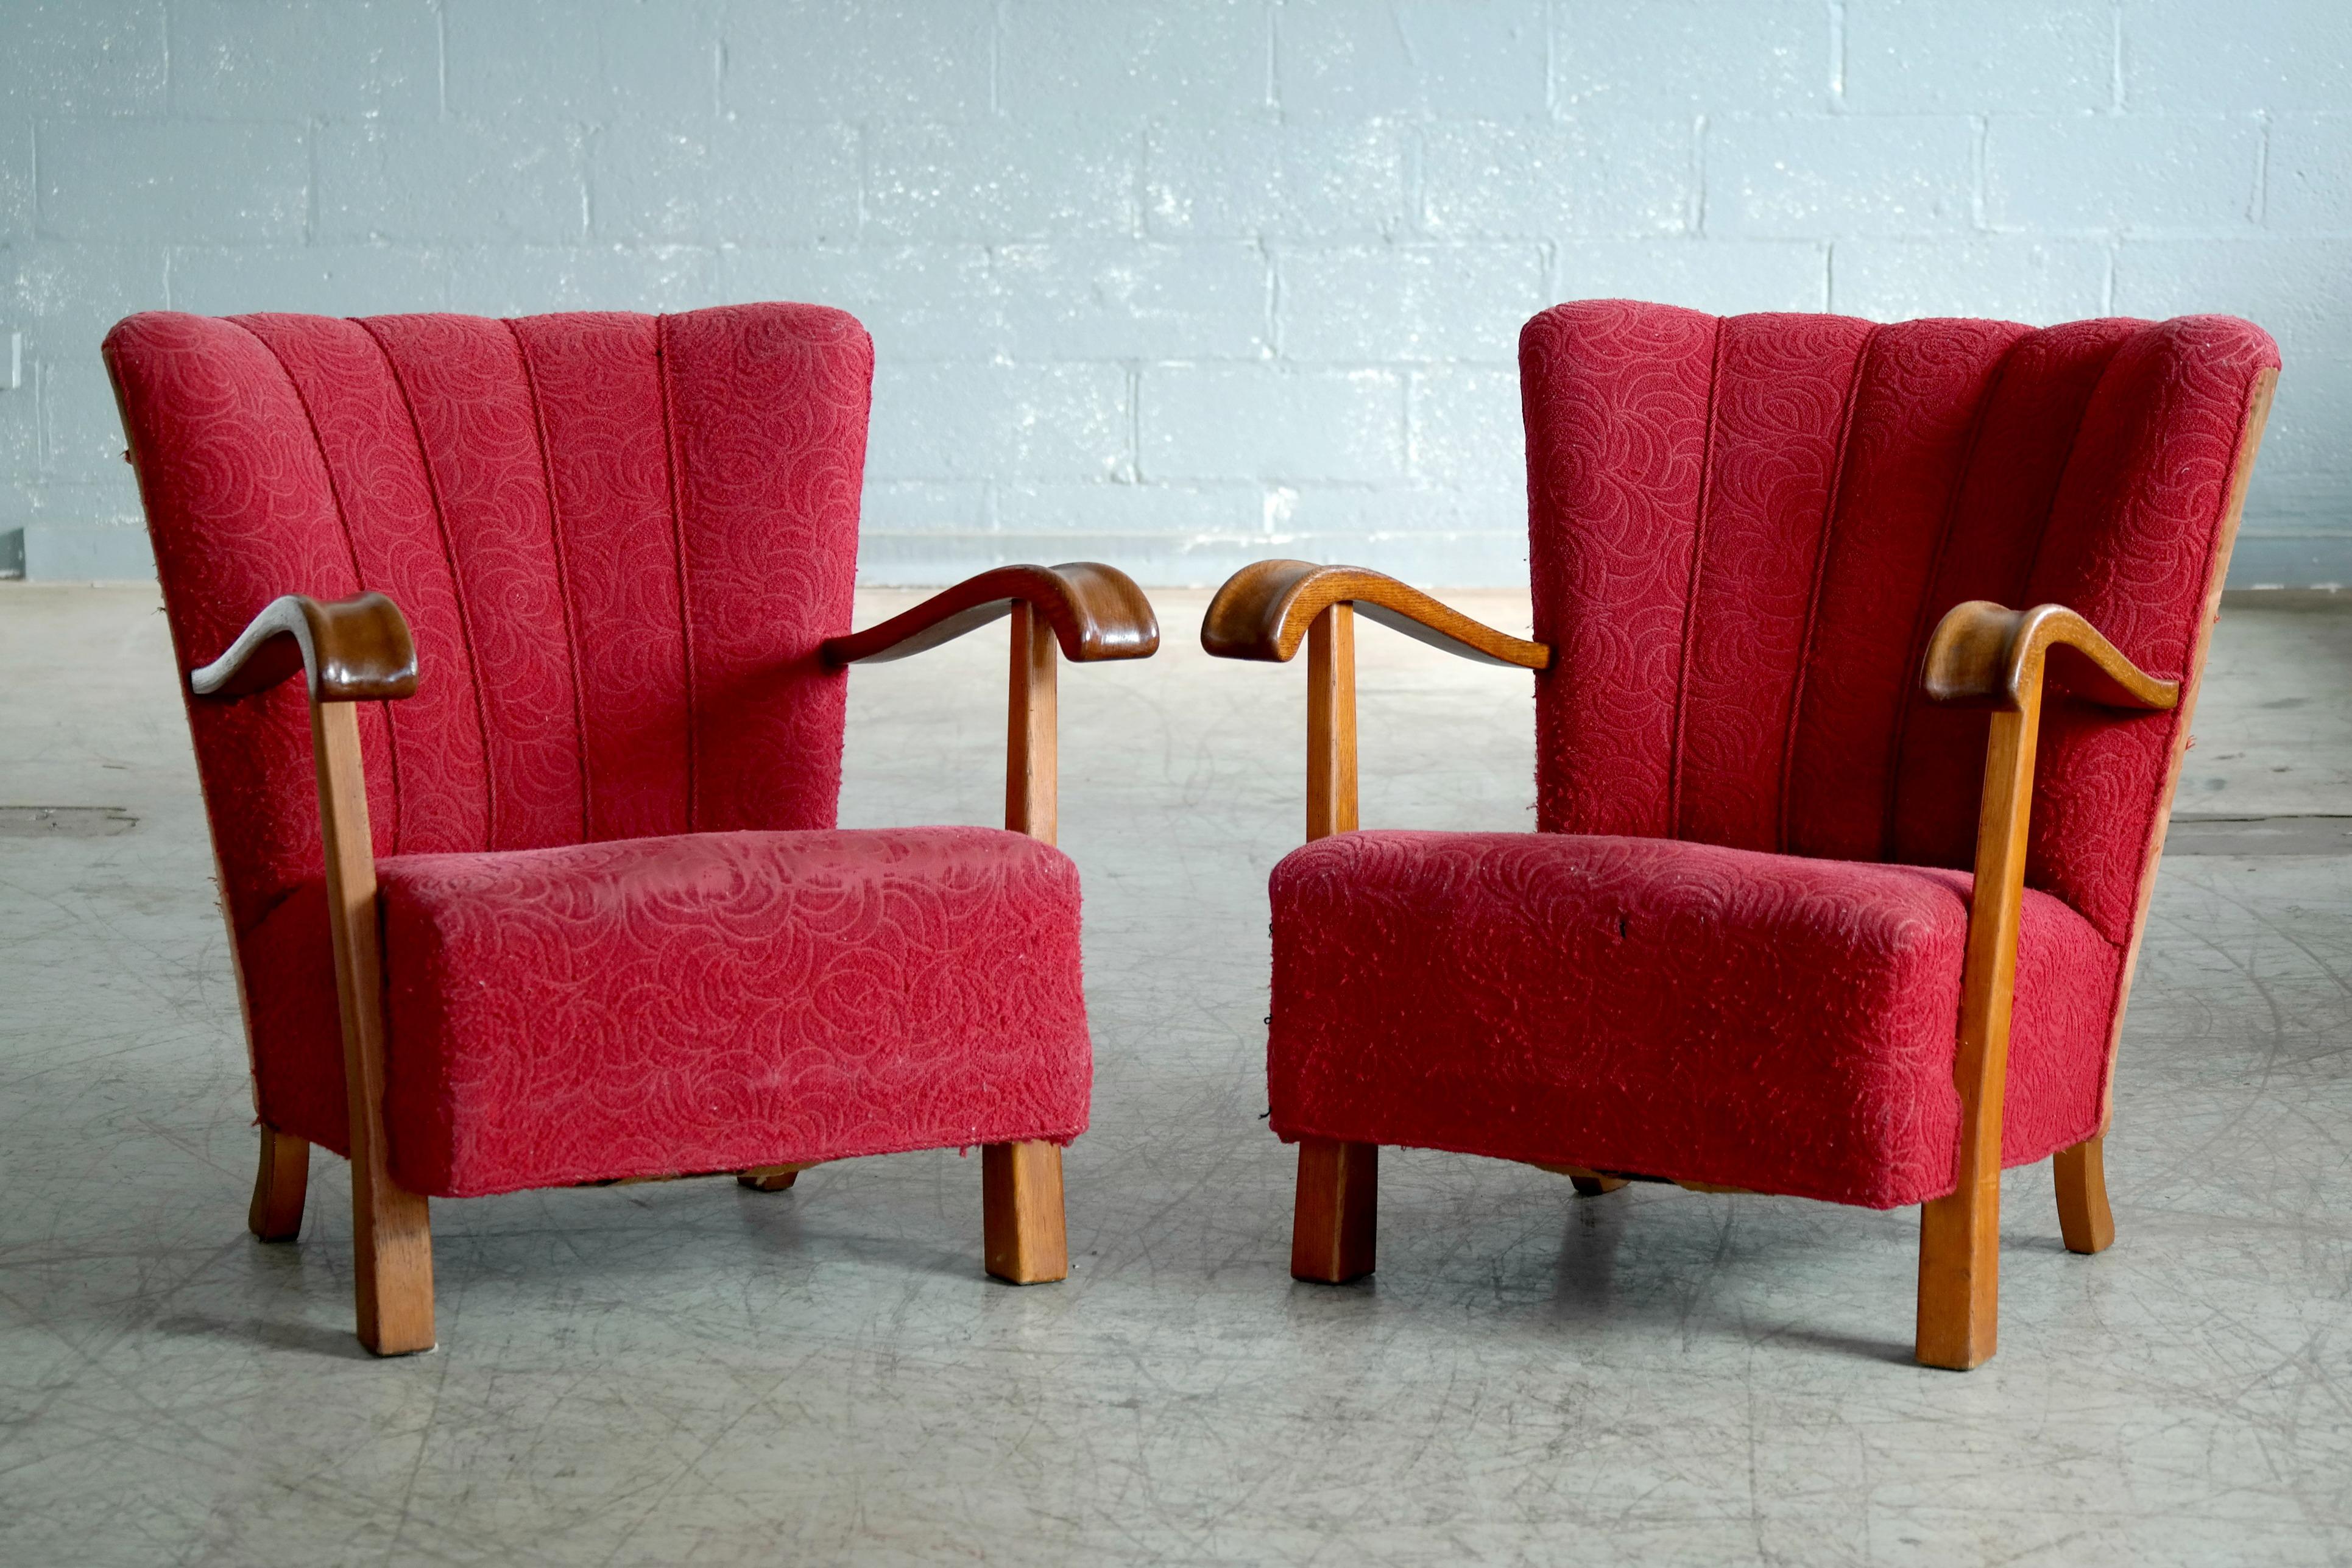 Very cool Danish early midcentury pair of open armrest lounge or club chairs made from oak wood in the 1940's. While it is not known who is the maker and designer behind these chairs we see this model from time to time in the Danish market